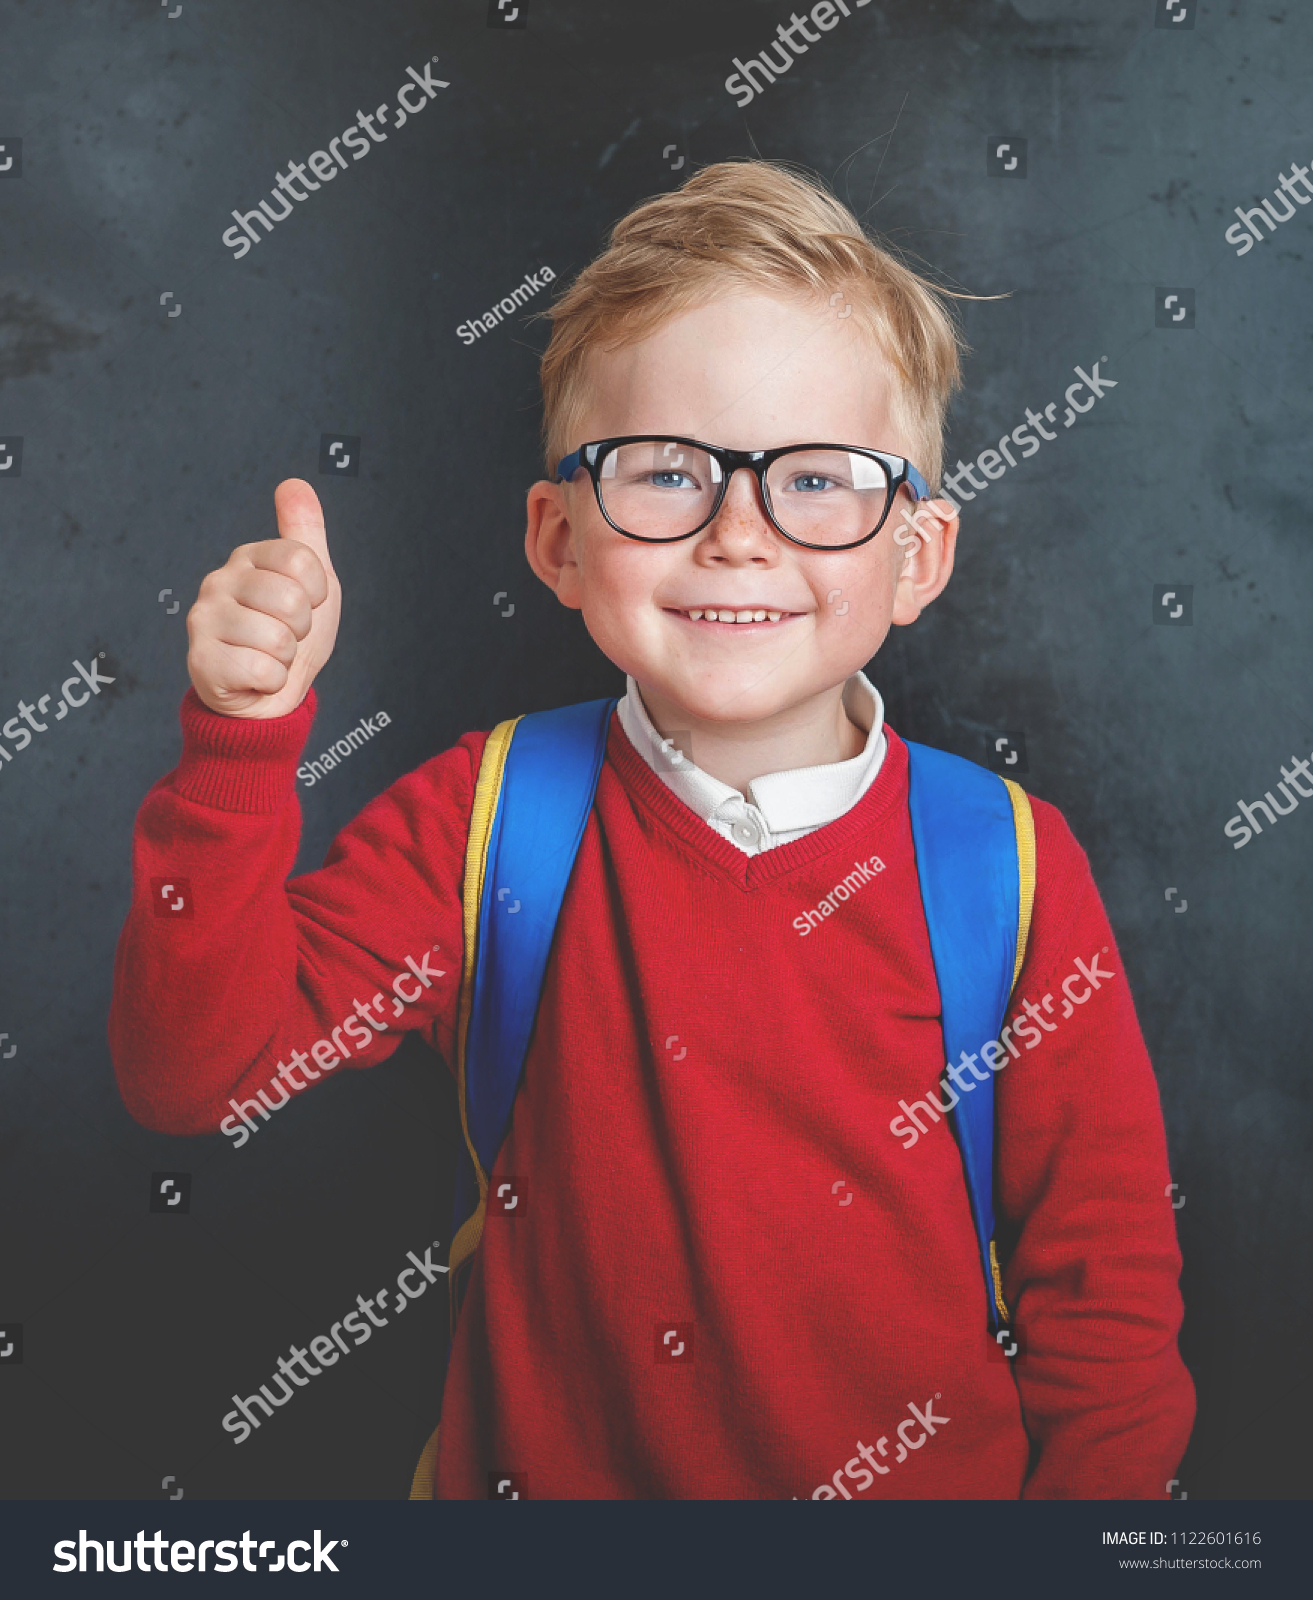 Back to school. Happy little boy in glasses with thumb up and backpack against blackboard.  #1122601616